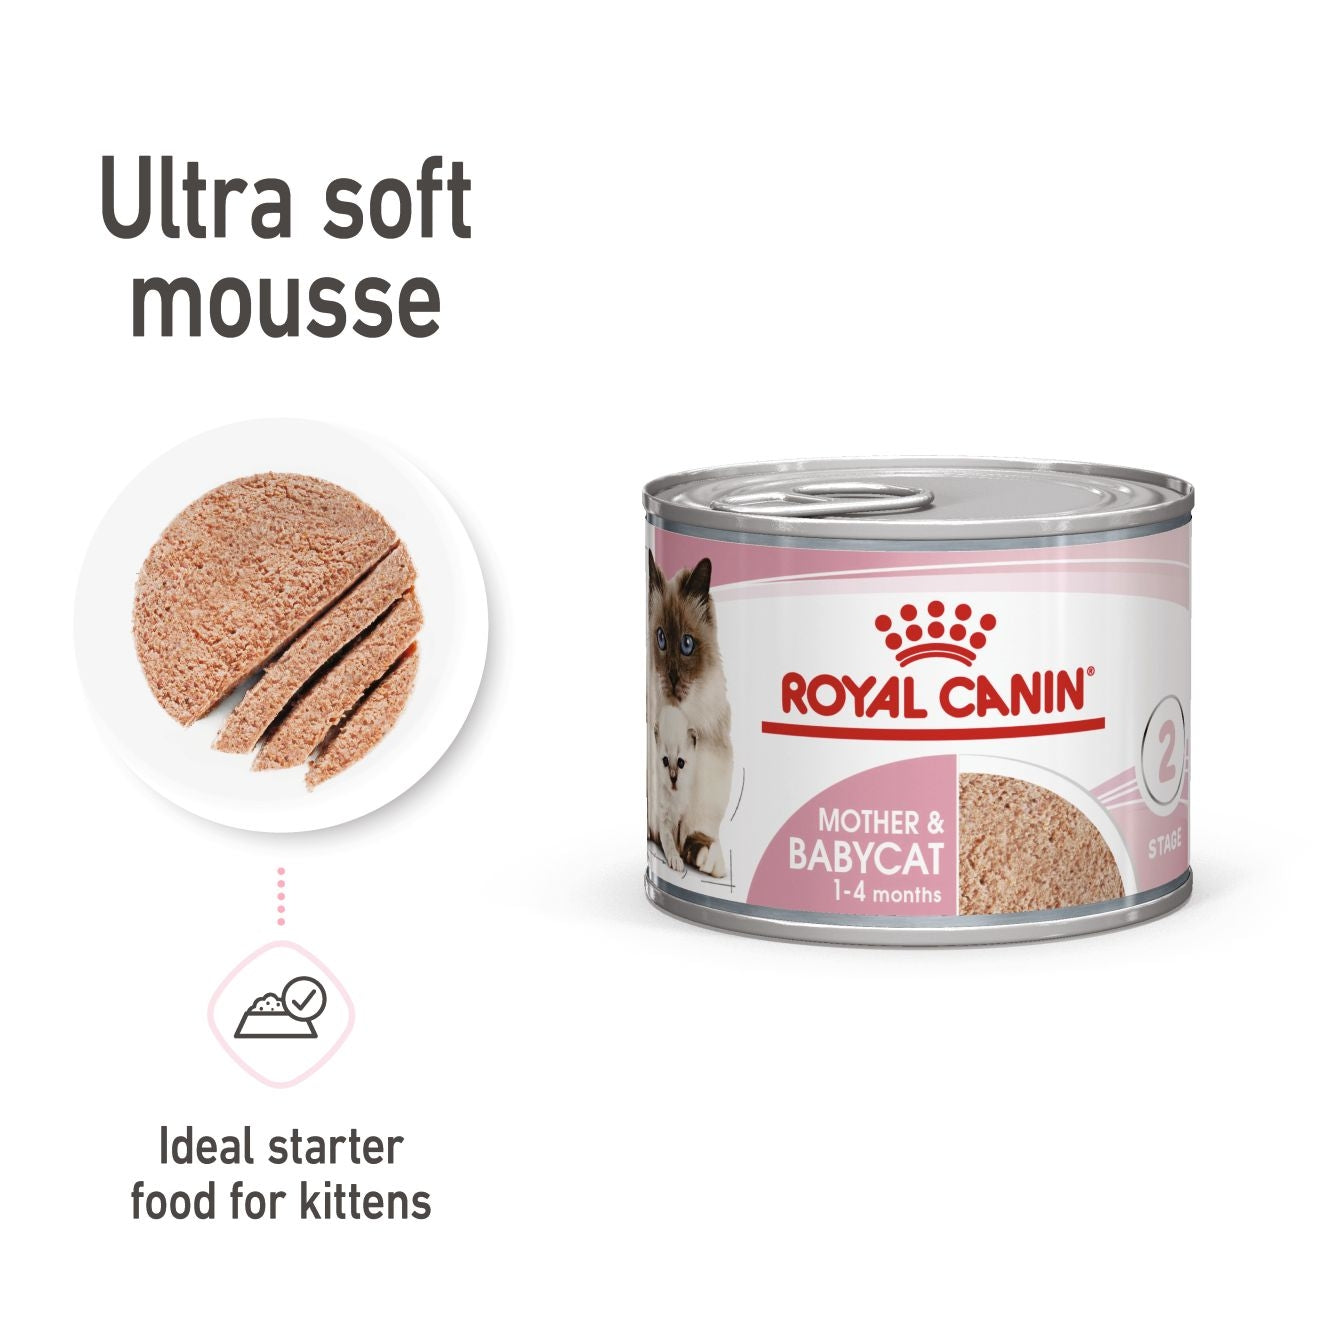 Royal Canin Mother & Babycat Mousse